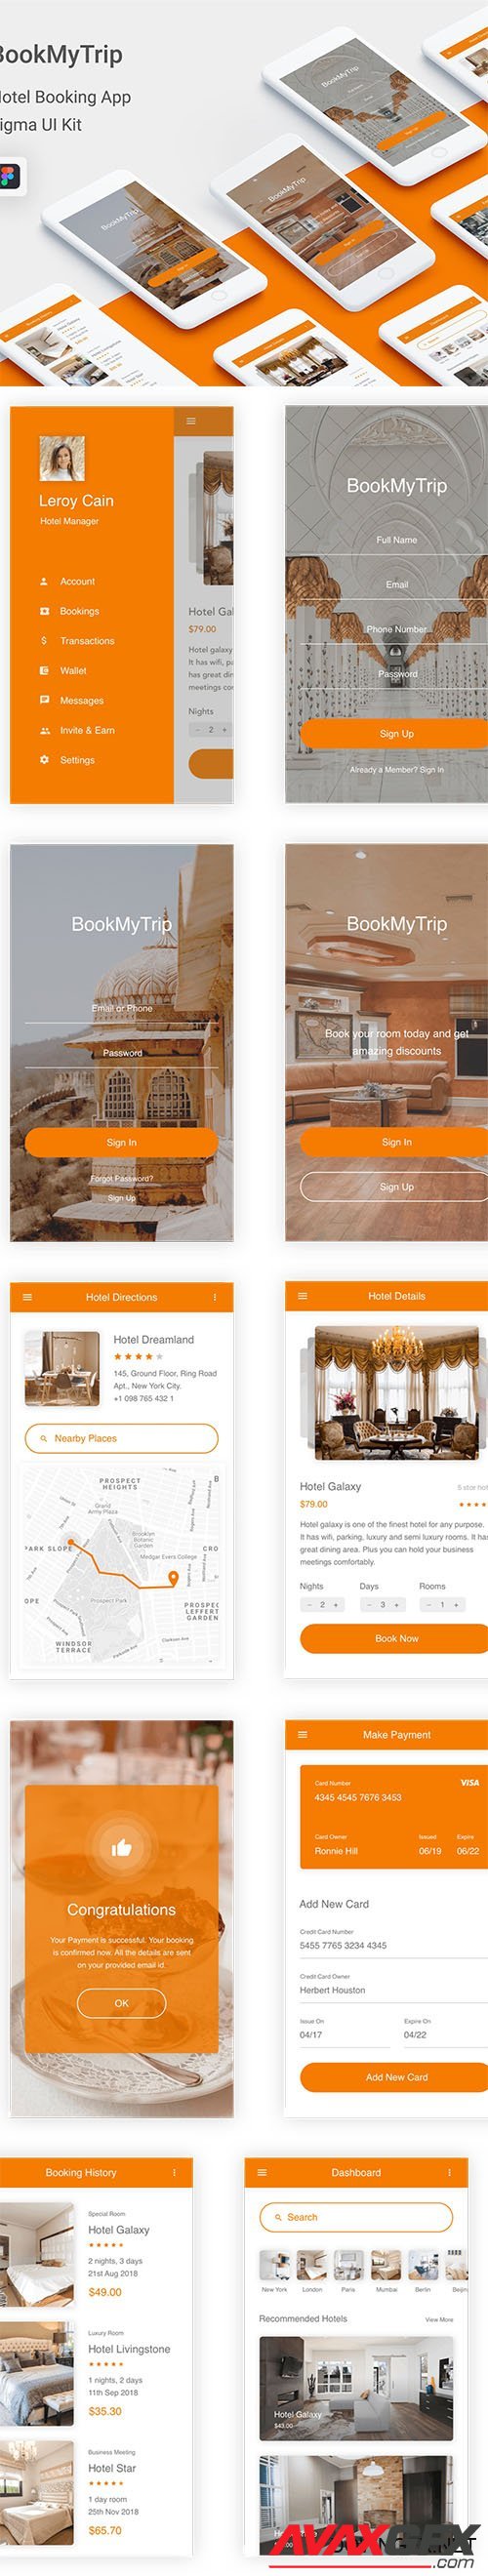 BookMyTrip - Hotel Booking UI Kit for Figma